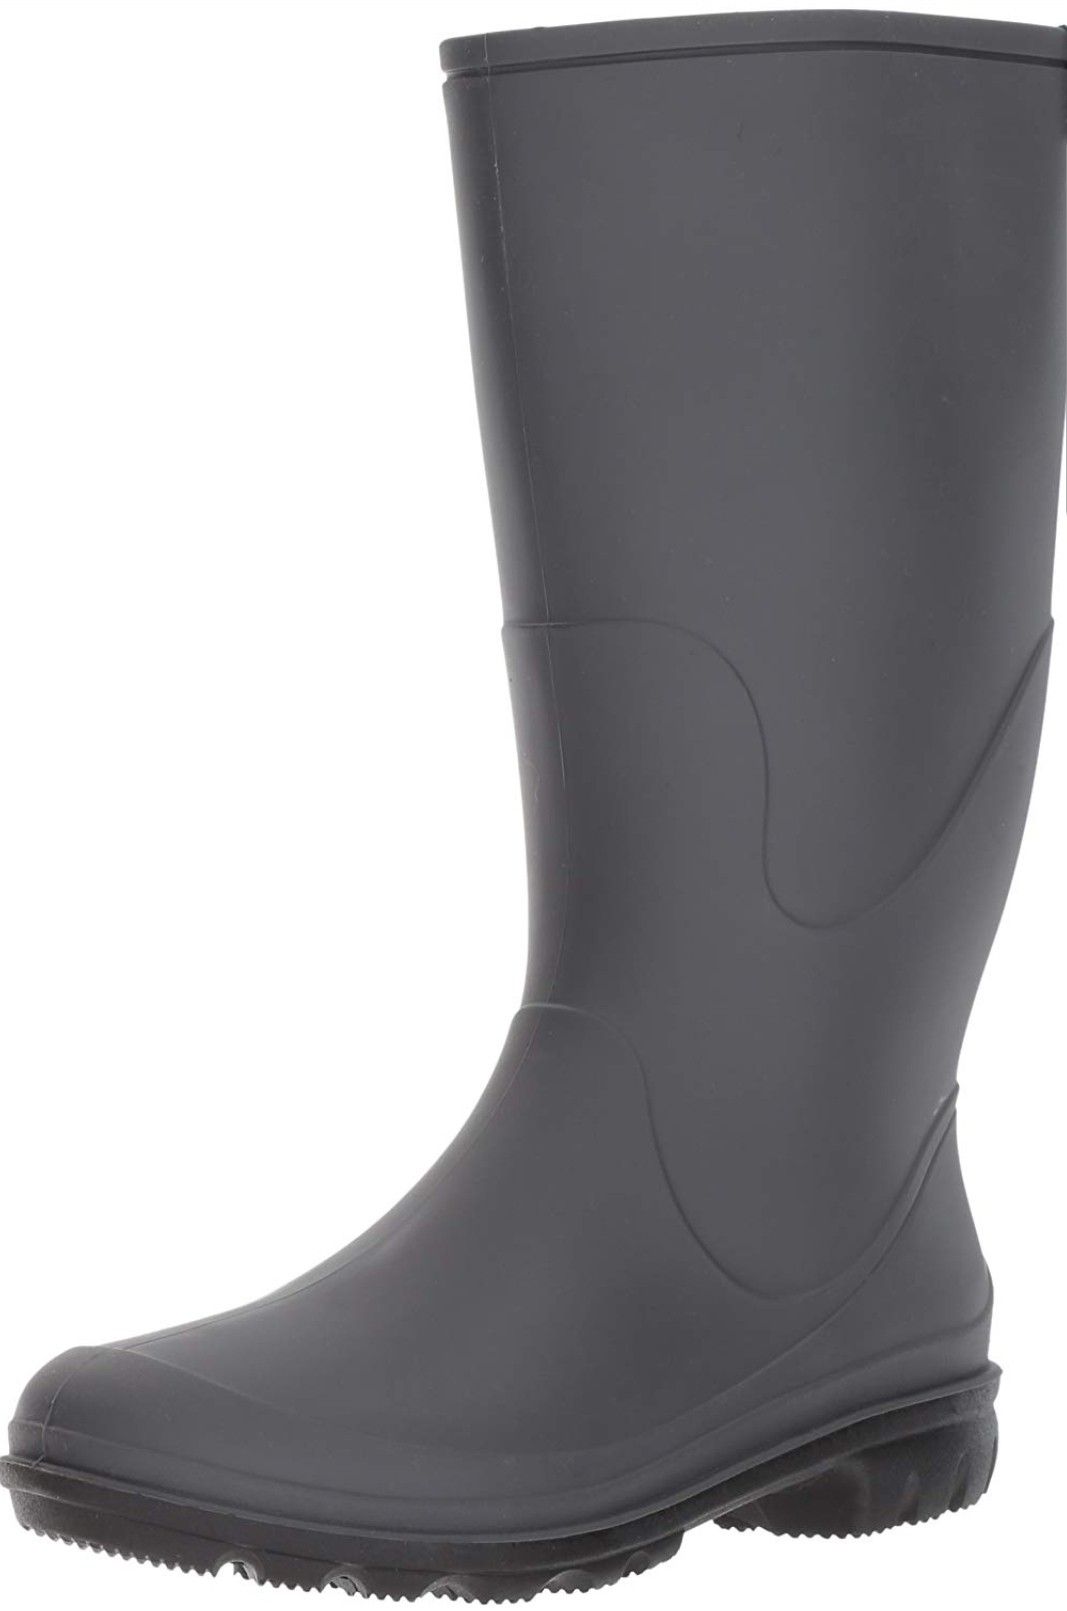 NEW size 9 WOMEN Rain Boot - Made in Canada - FIRM PRICE